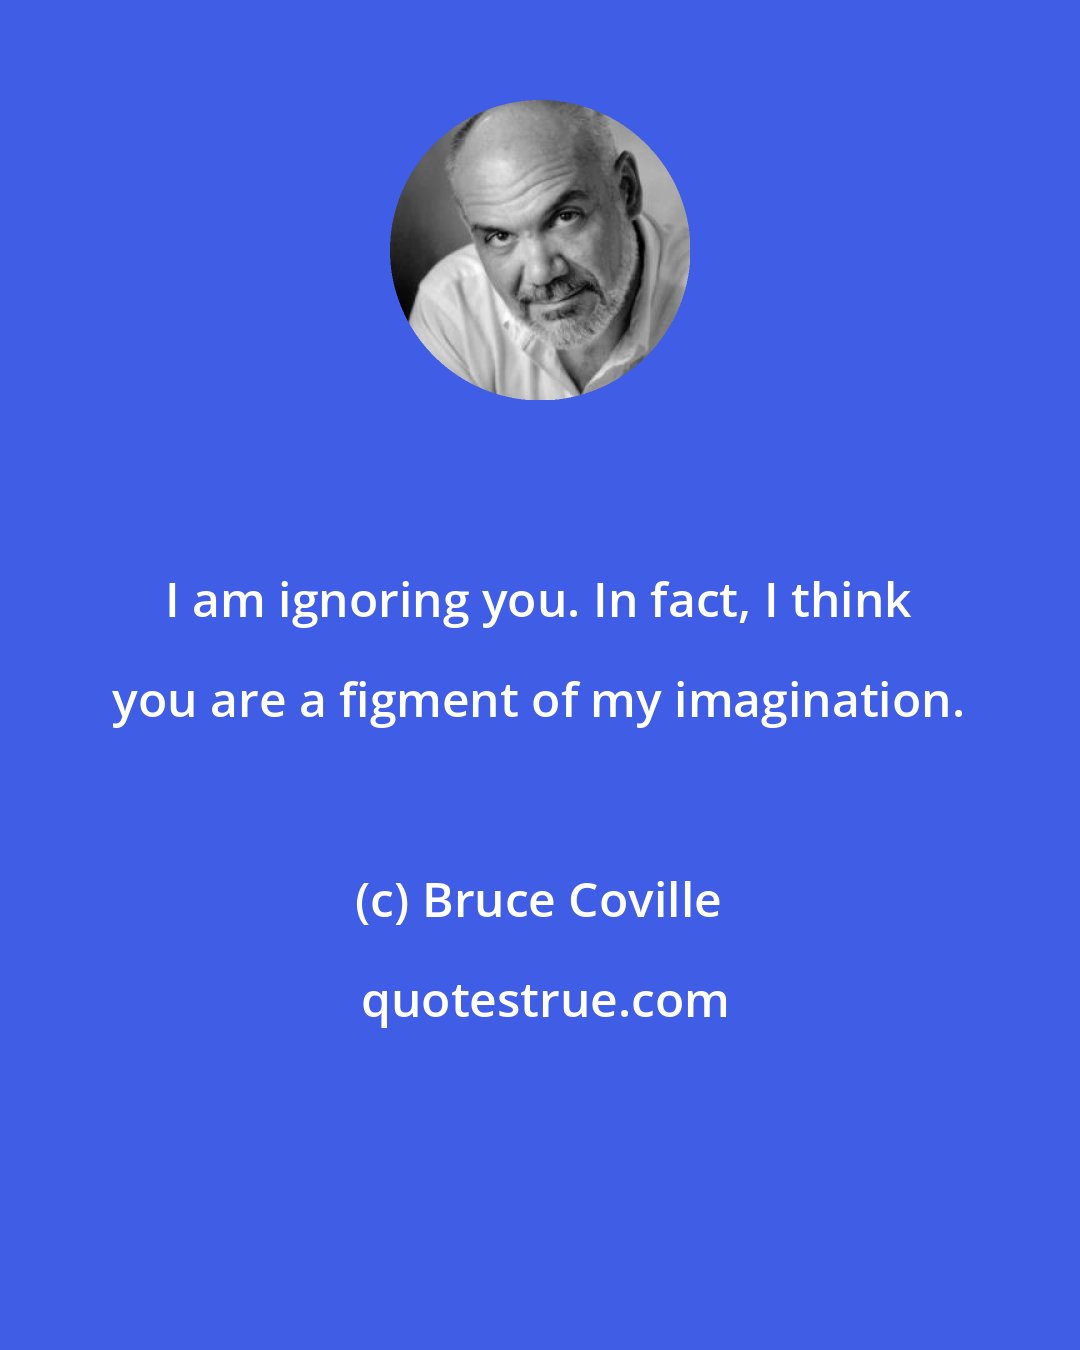 Bruce Coville: I am ignoring you. In fact, I think you are a figment of my imagination.